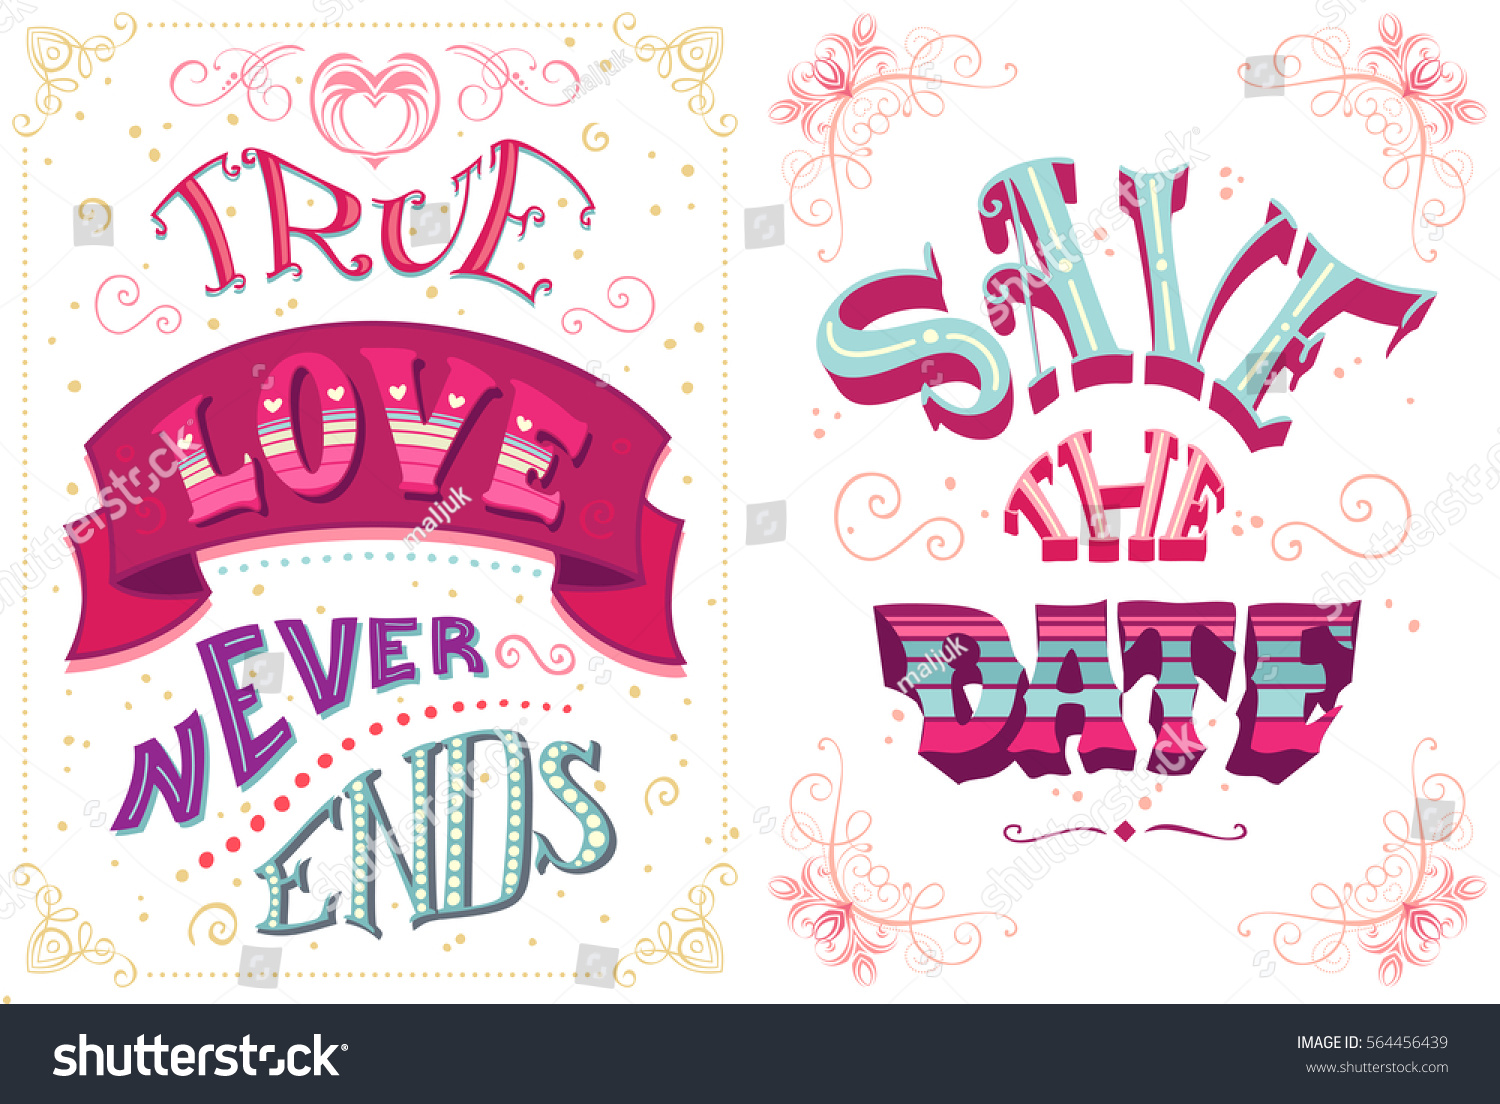 True love never ends Save the date Set of romantic quotes Vector hand